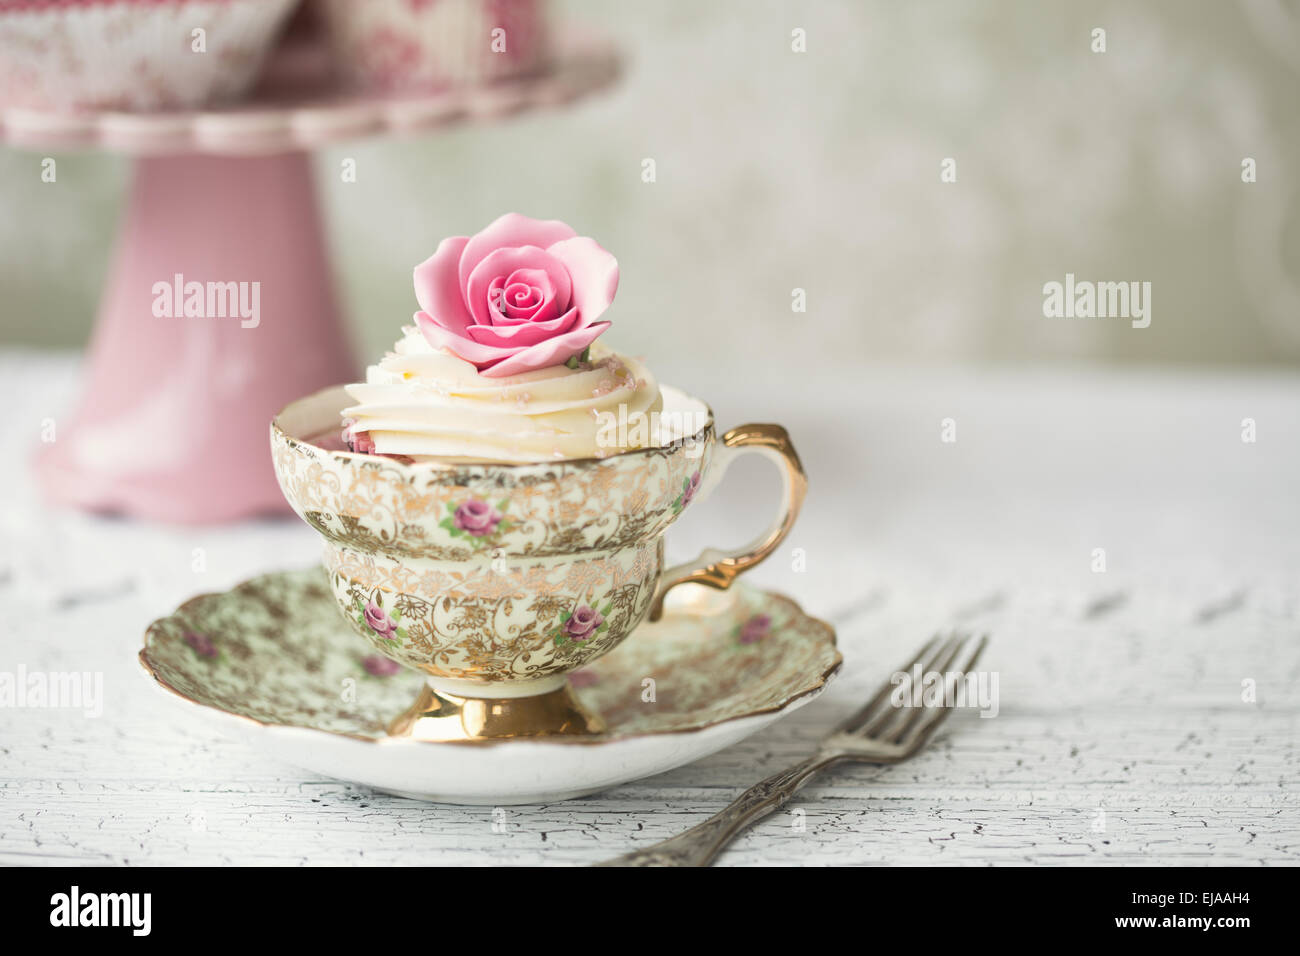 Rose cupcake in a vintage teacup Stock Photo